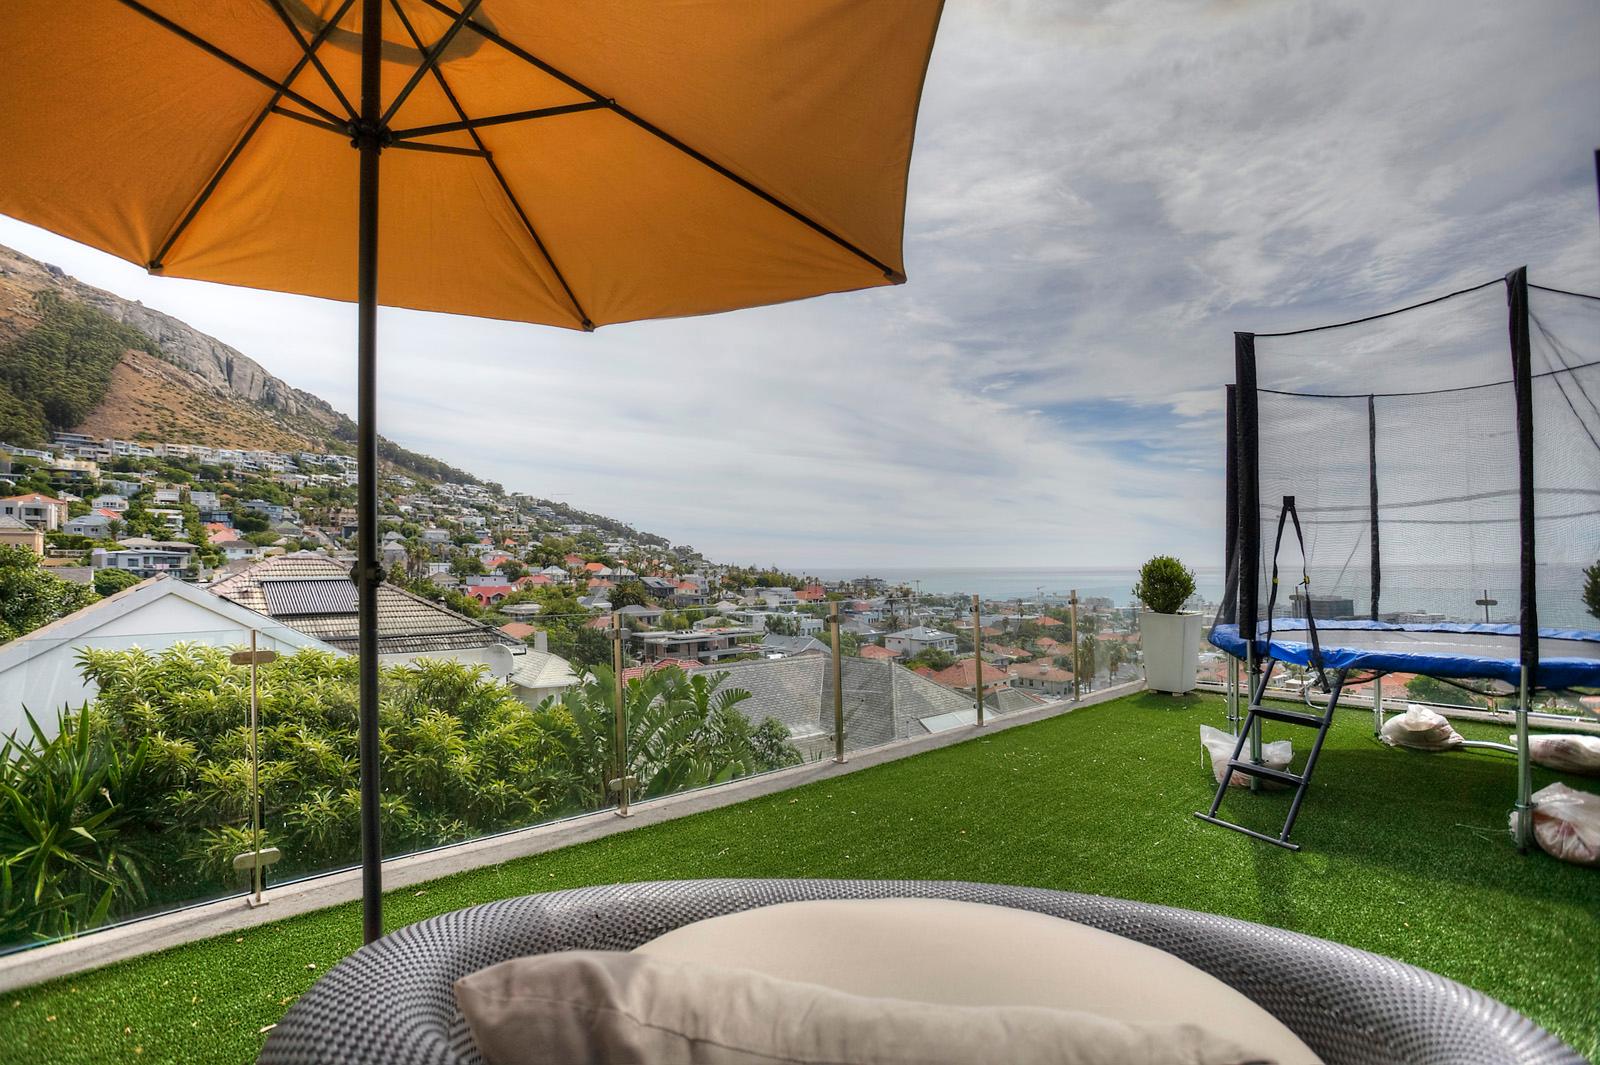 Photo 22 of Bordeaux Villa accommodation in Fresnaye, Cape Town with 4 bedrooms and 3.5 bathrooms